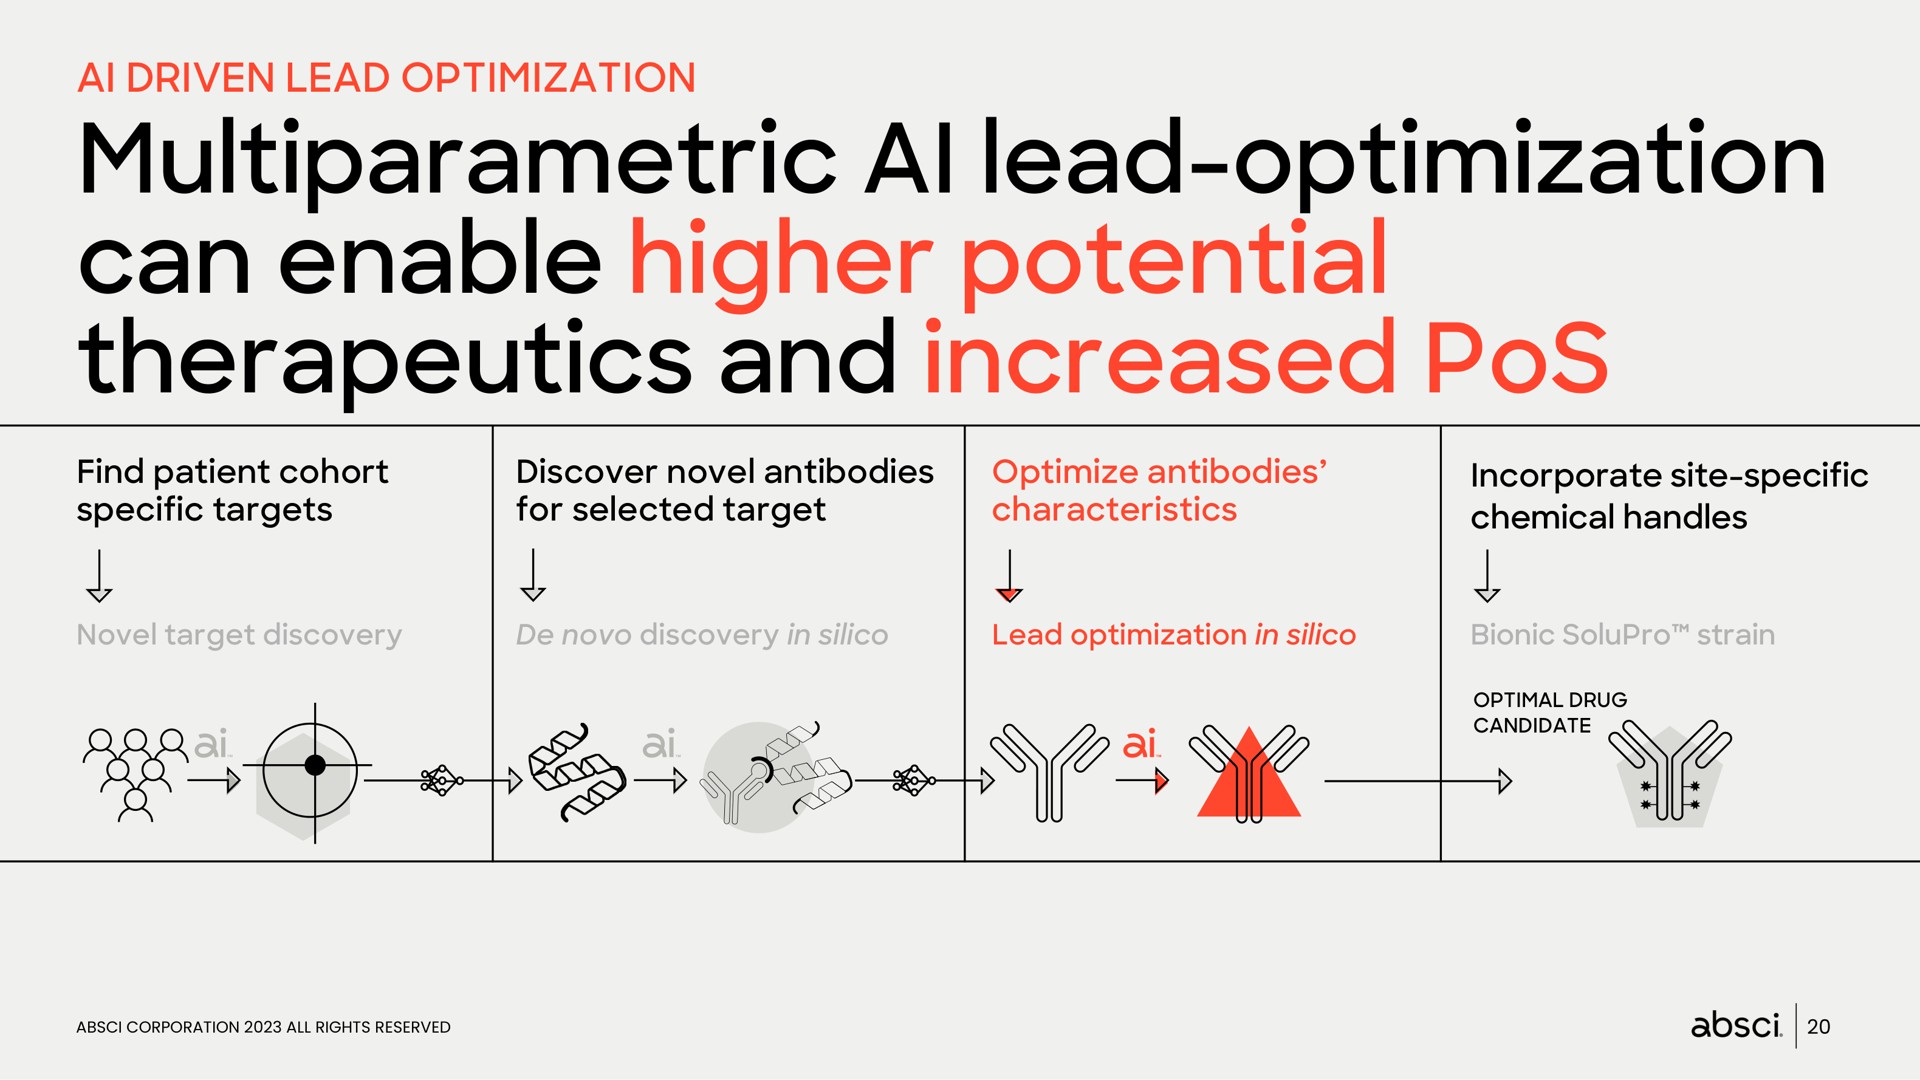 lead optimization can enable higher potential therapeutics and increased pos | Absci